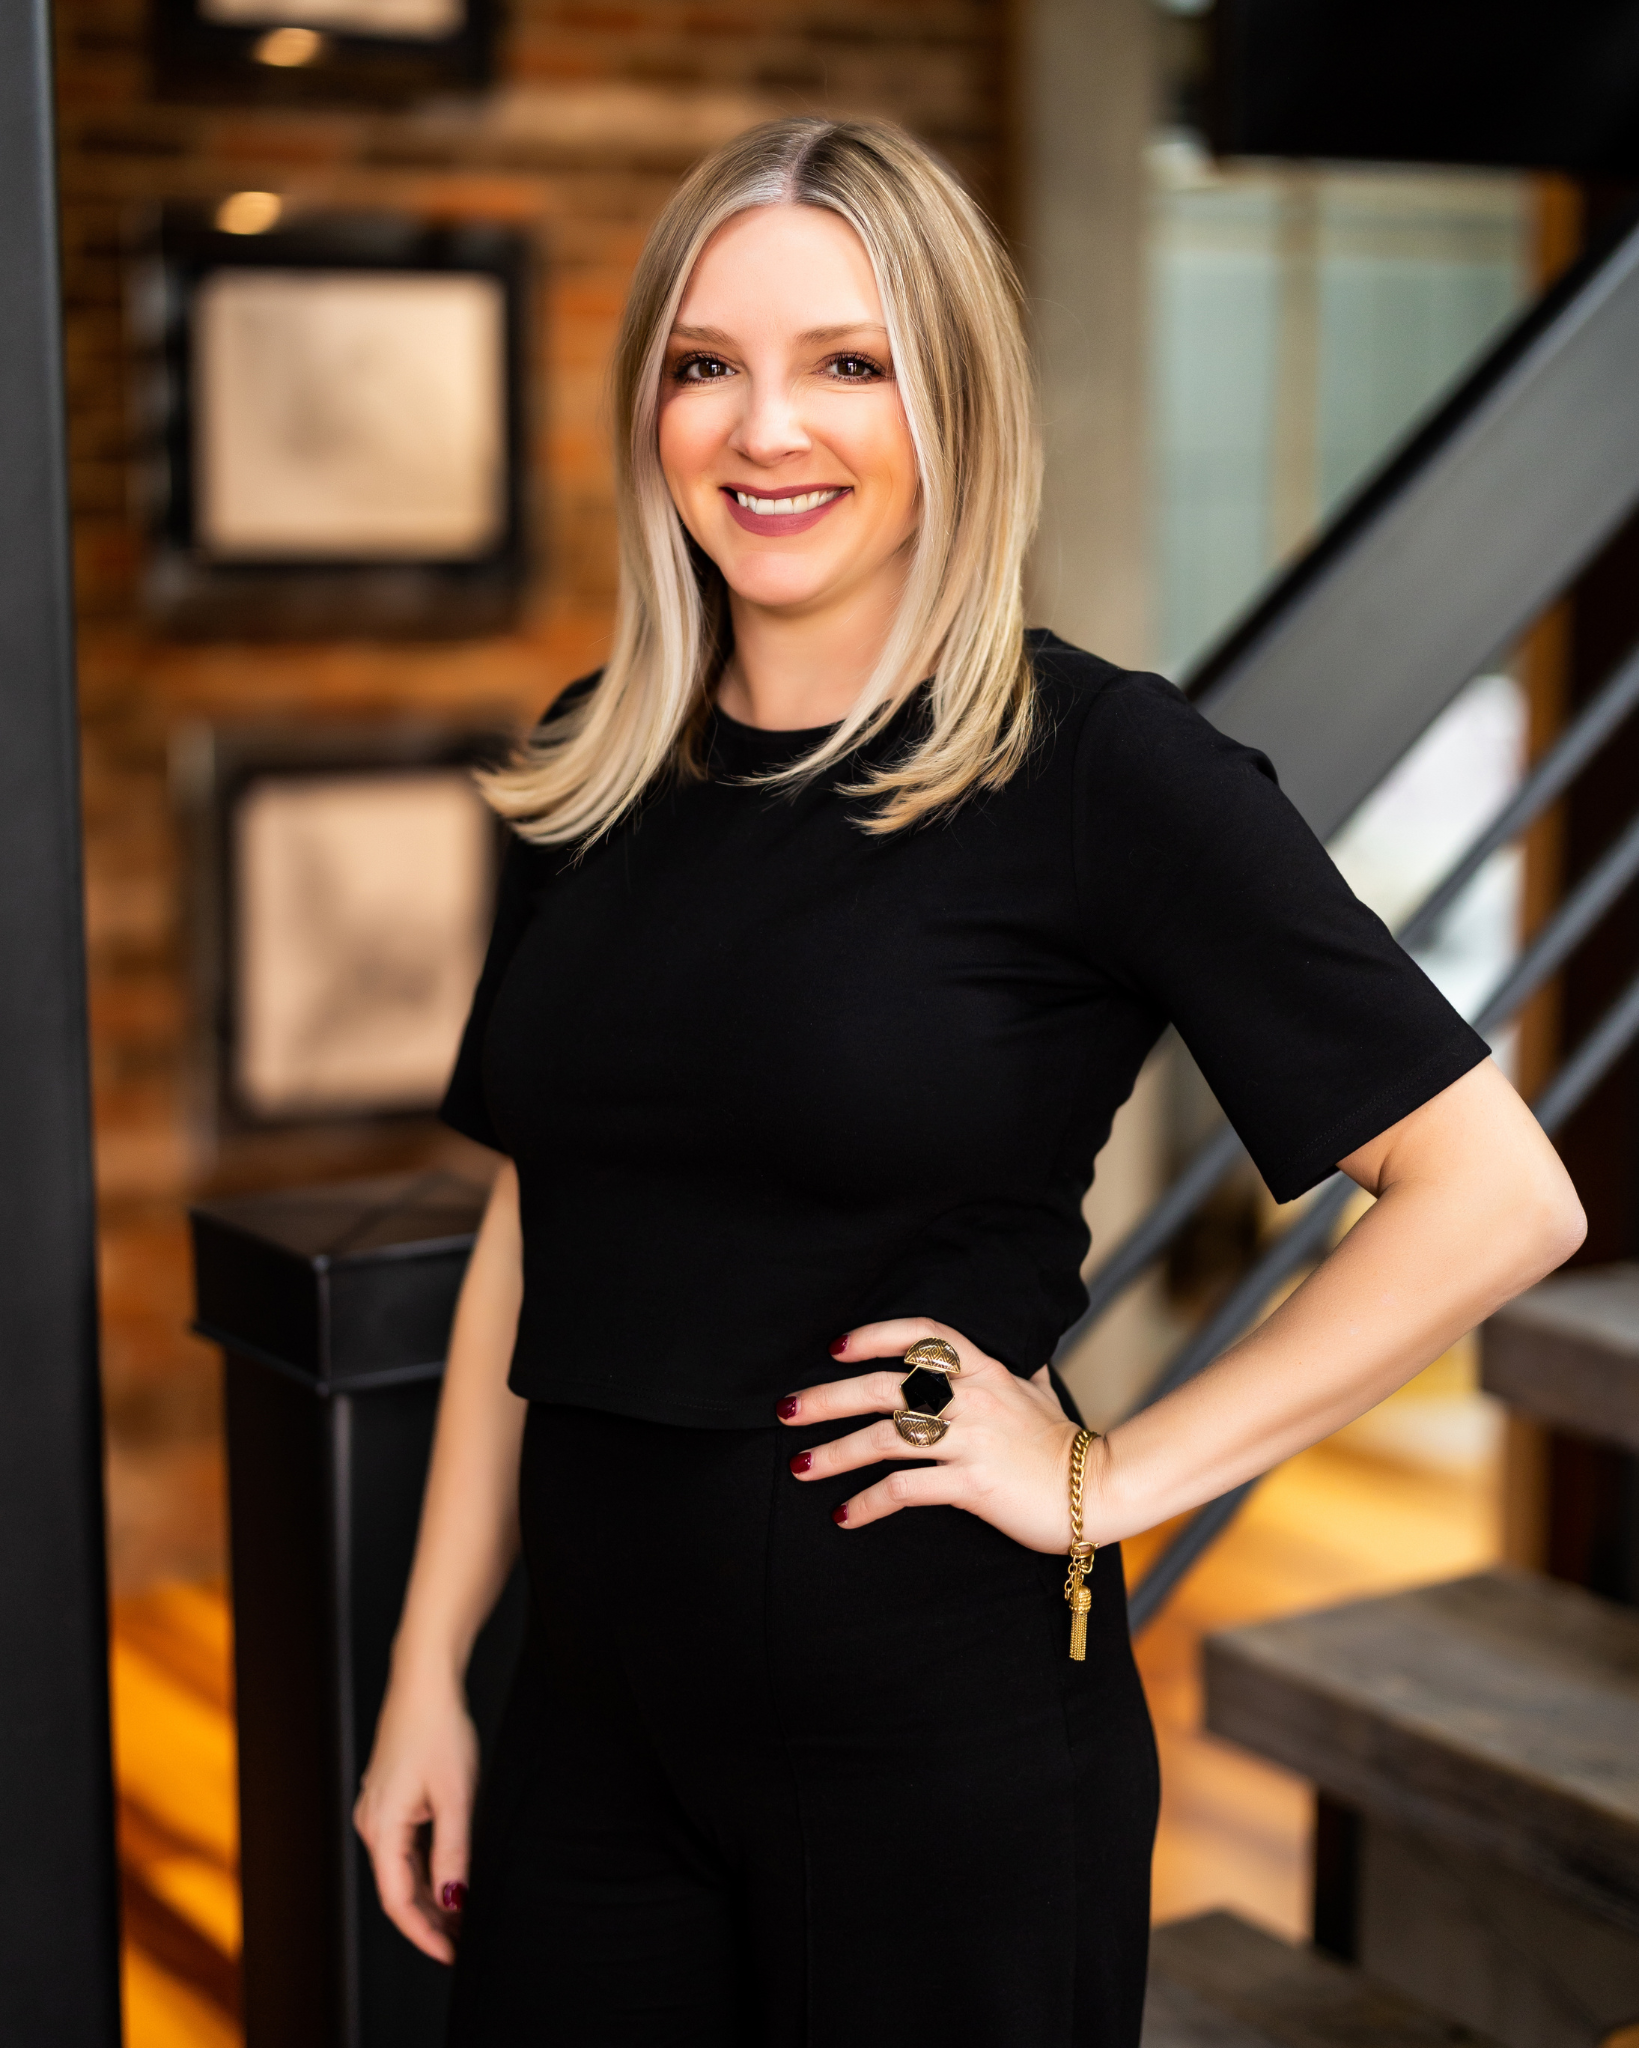 A top realtor in Texarkana, Lauren Callaway at PH Realty, specializes in top-notch marketing and home staging